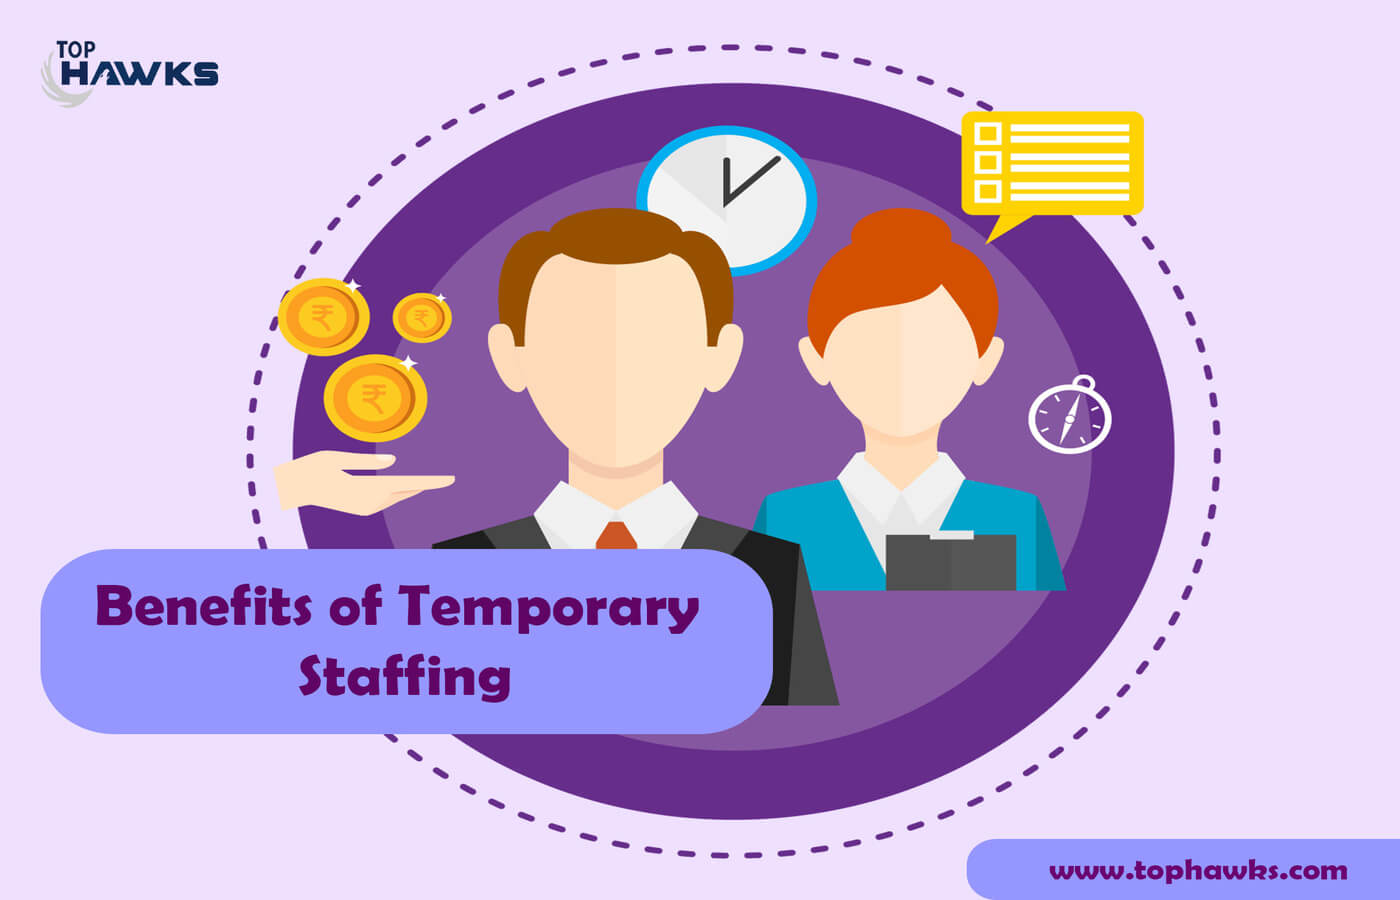 Image depicting Benefits of temporary staffing 